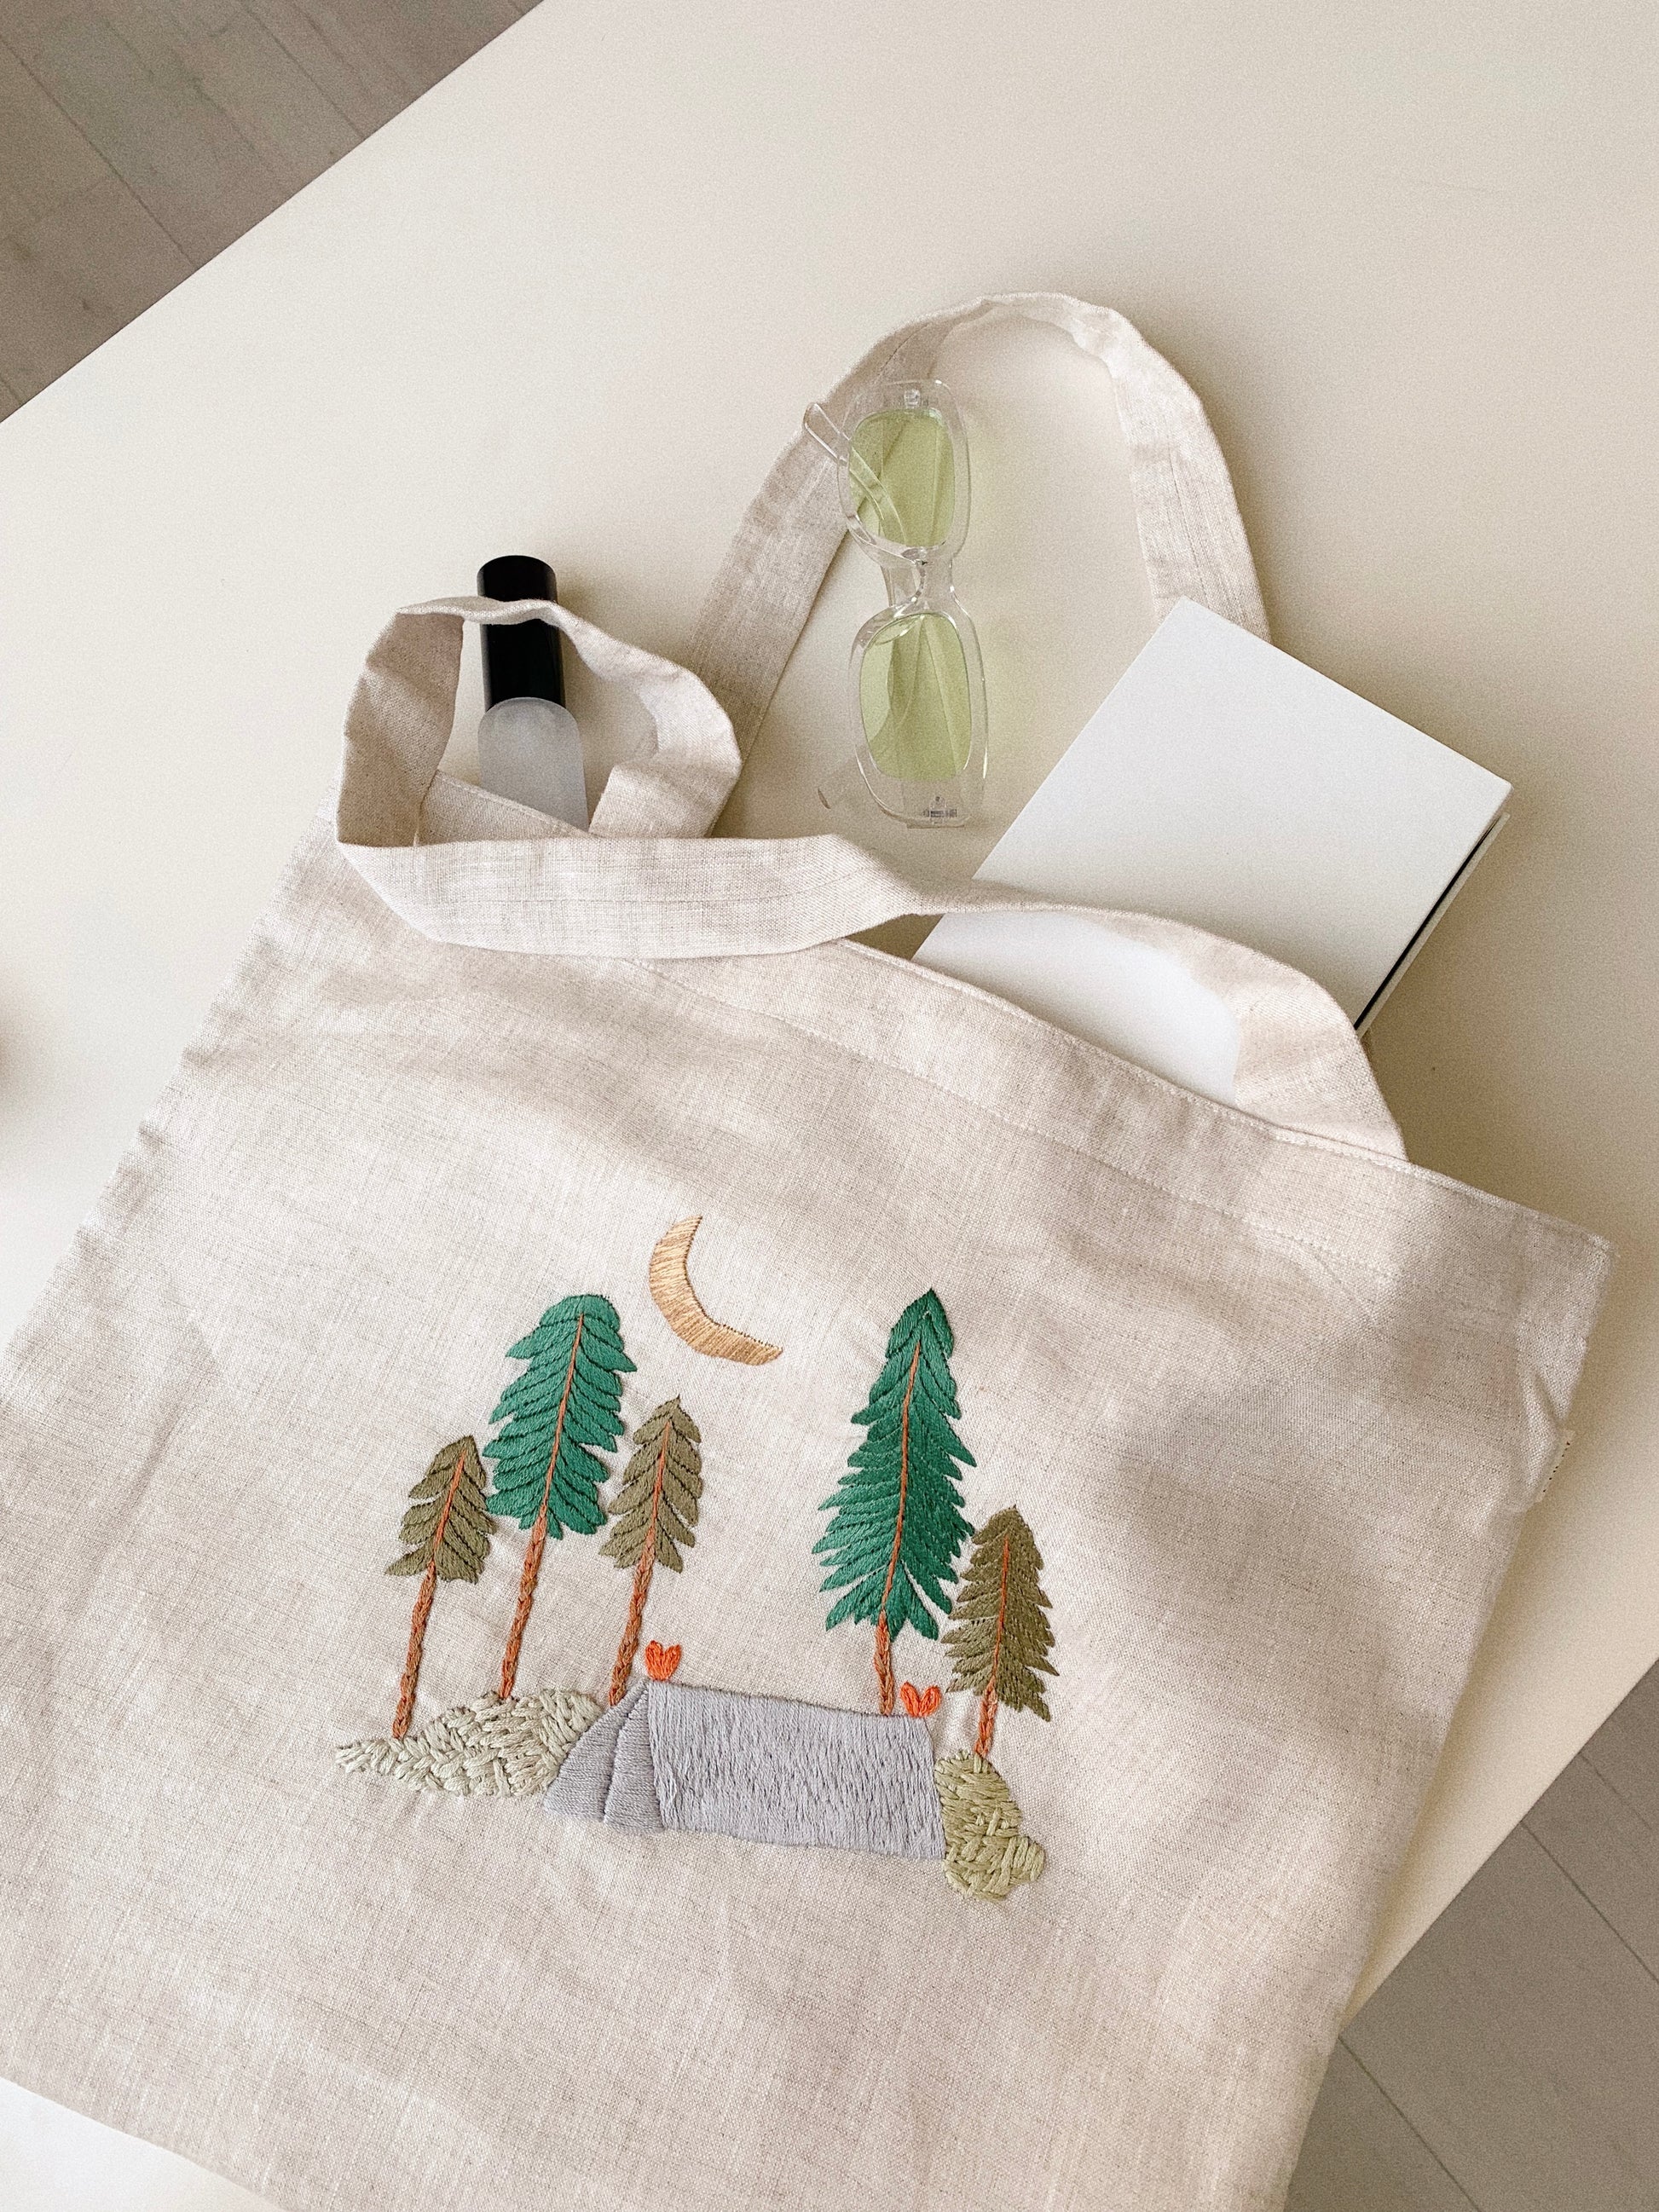 Hand Embroidery Linen Canvas Tote Bag is Beautiful and unique tote bag made from high-quality linen canvas with hand-stitched forest embroidery